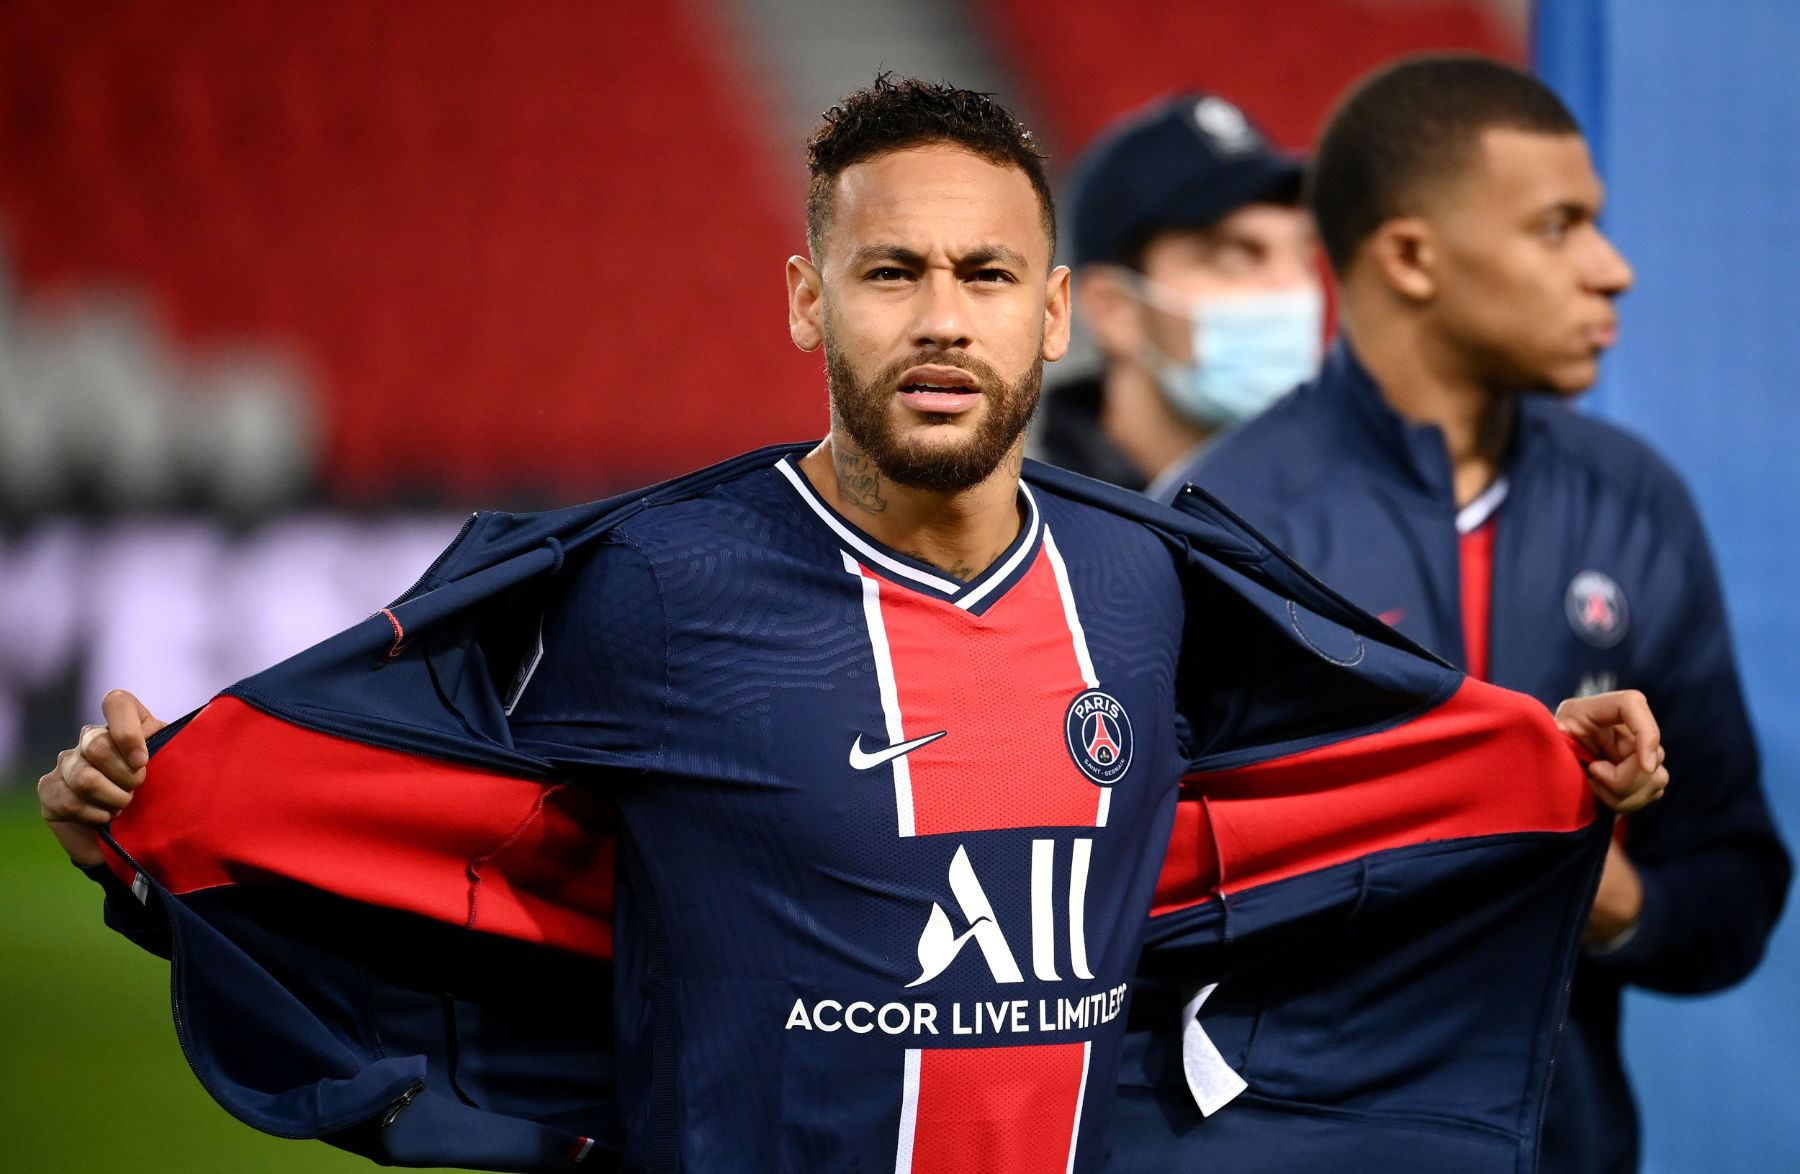 Angers Manager Explains Why he Asked for Neymar's Jersey During Fixture